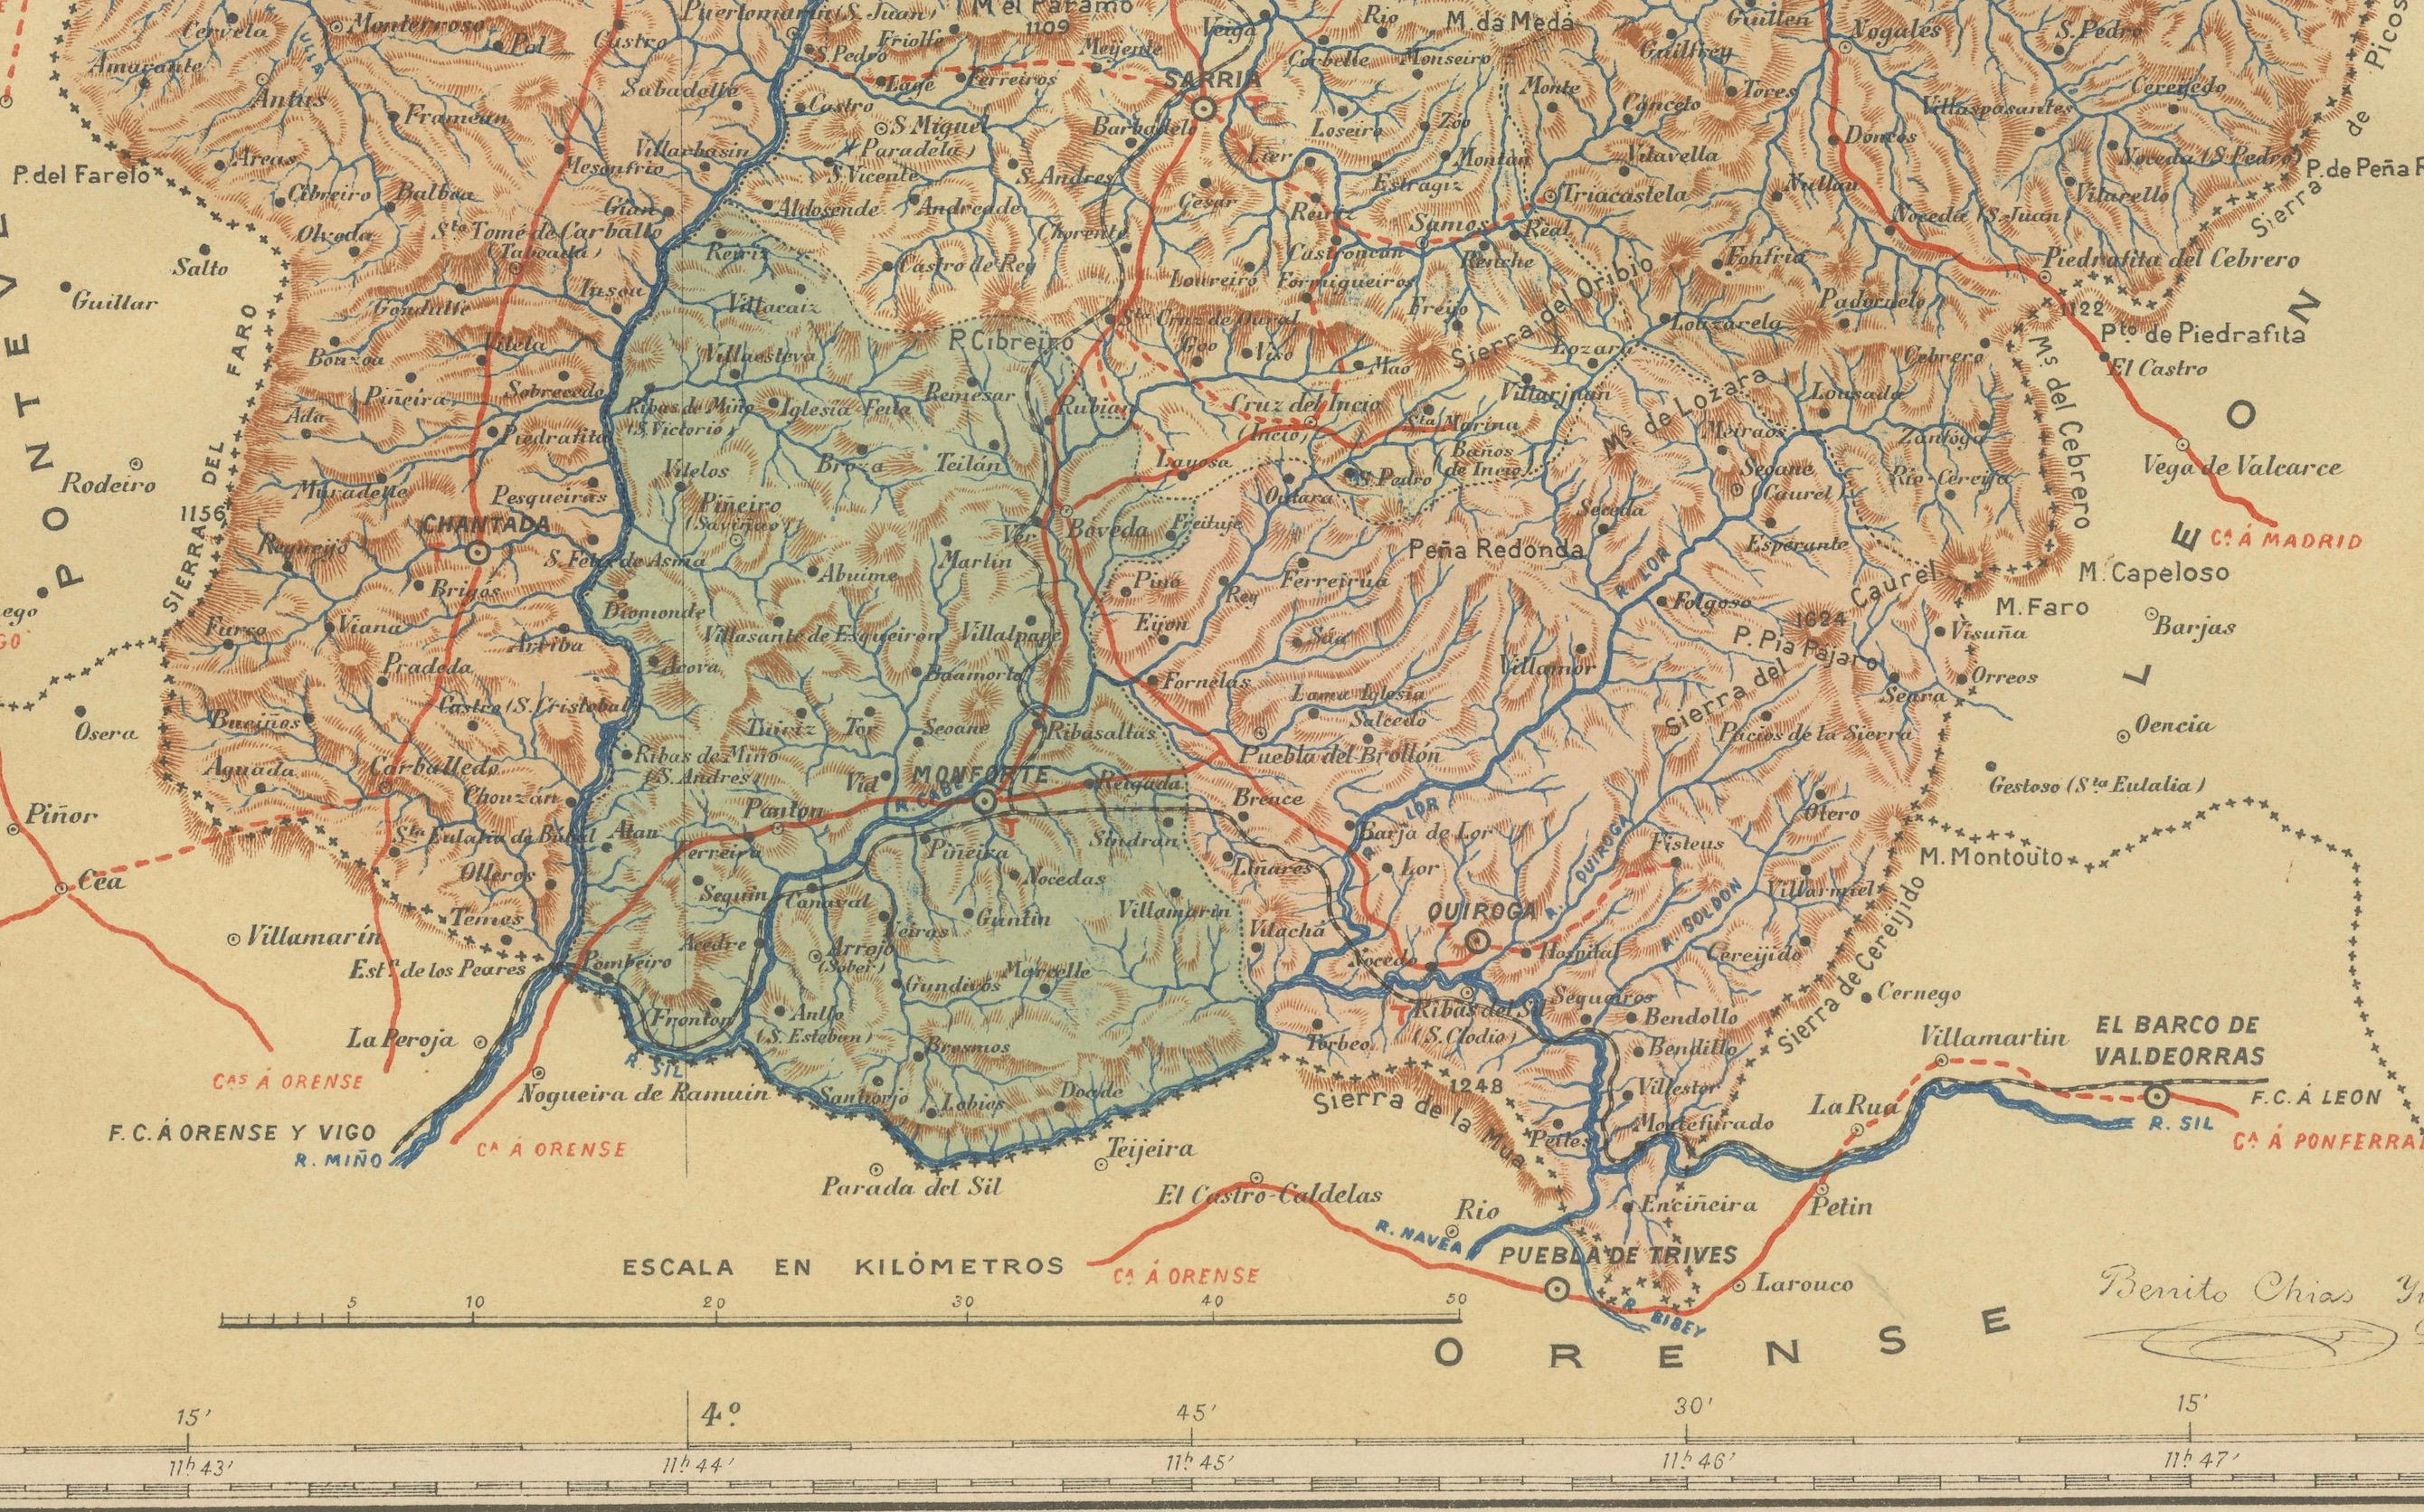 The map presents the province of Lugo, located in the autonomous community of Galicia in northwestern Spain, as it was in 1901. Notable features include:

- **Topography**: The province's terrain is depicted, which ranges from the coastal areas by